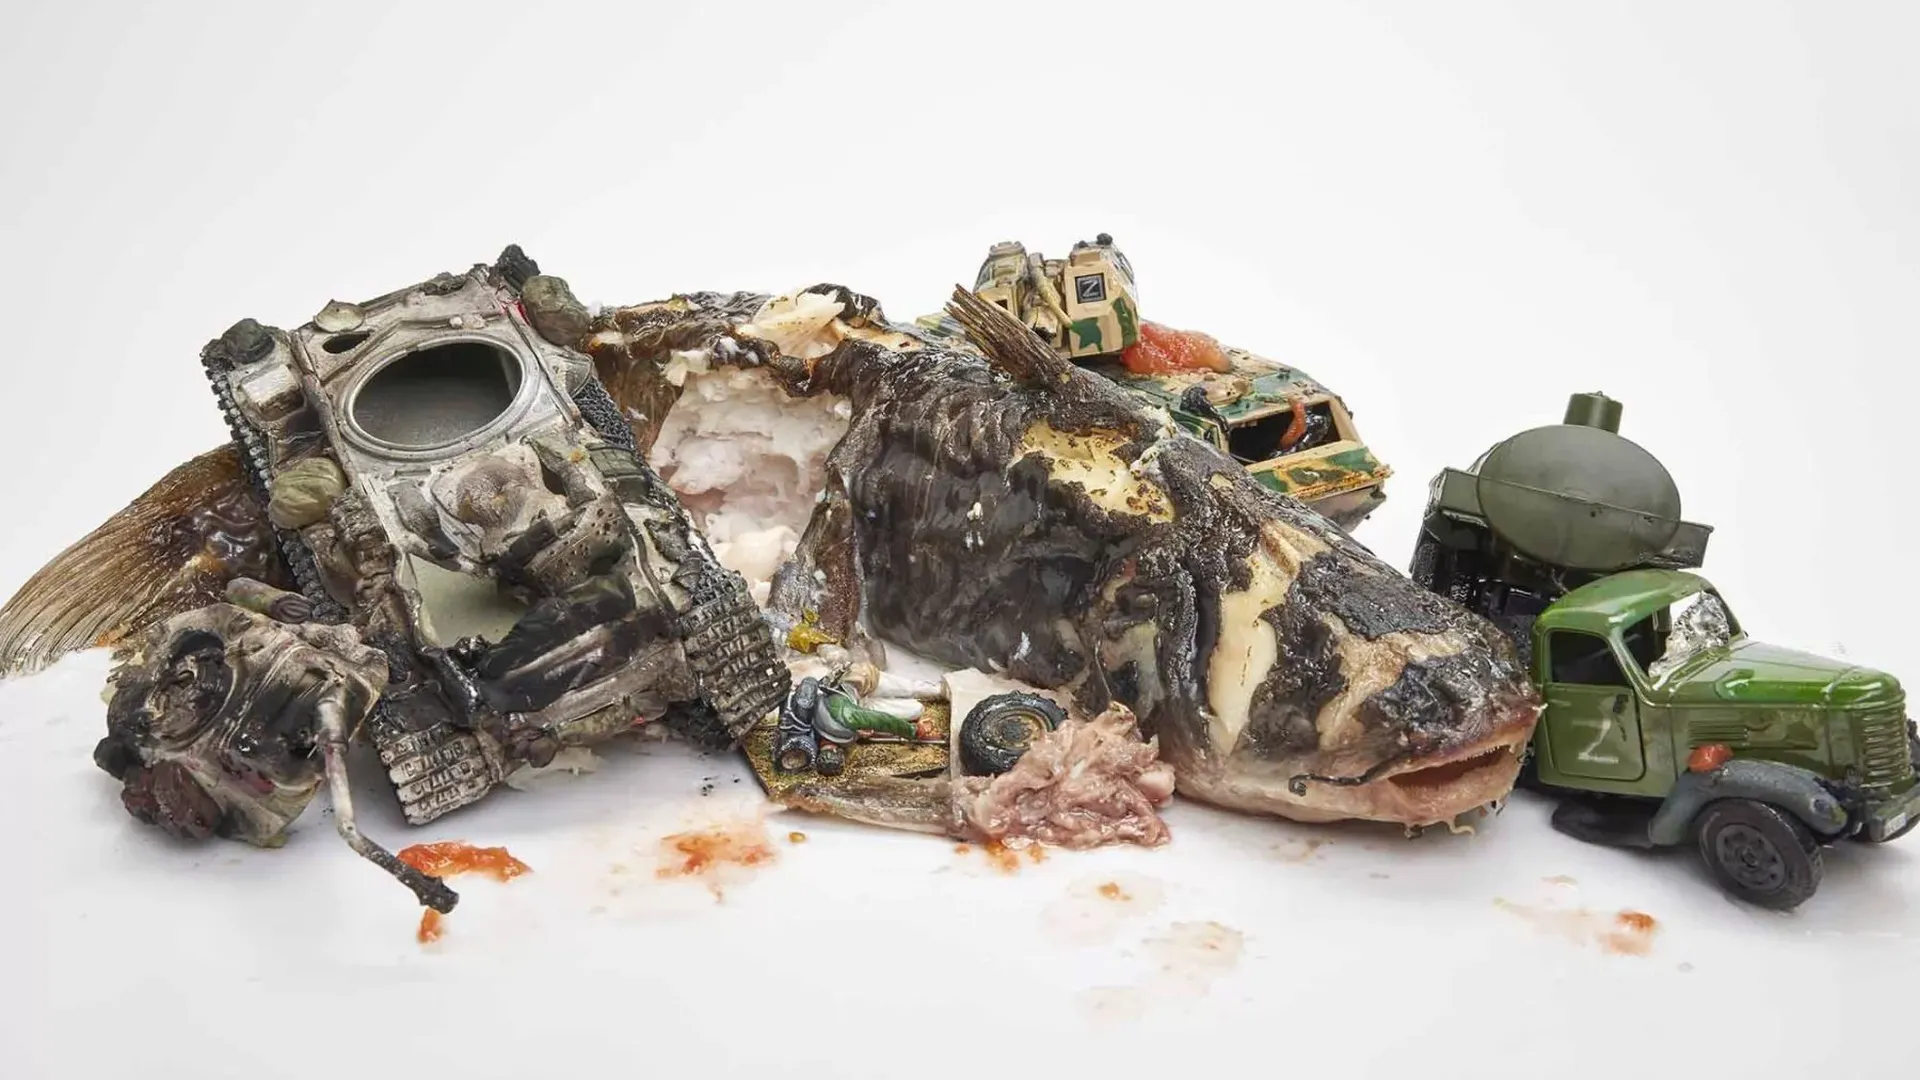 Jim Riswold's "Putin's Big Parade With Dead Catfish" with toy tanks and real dead fish